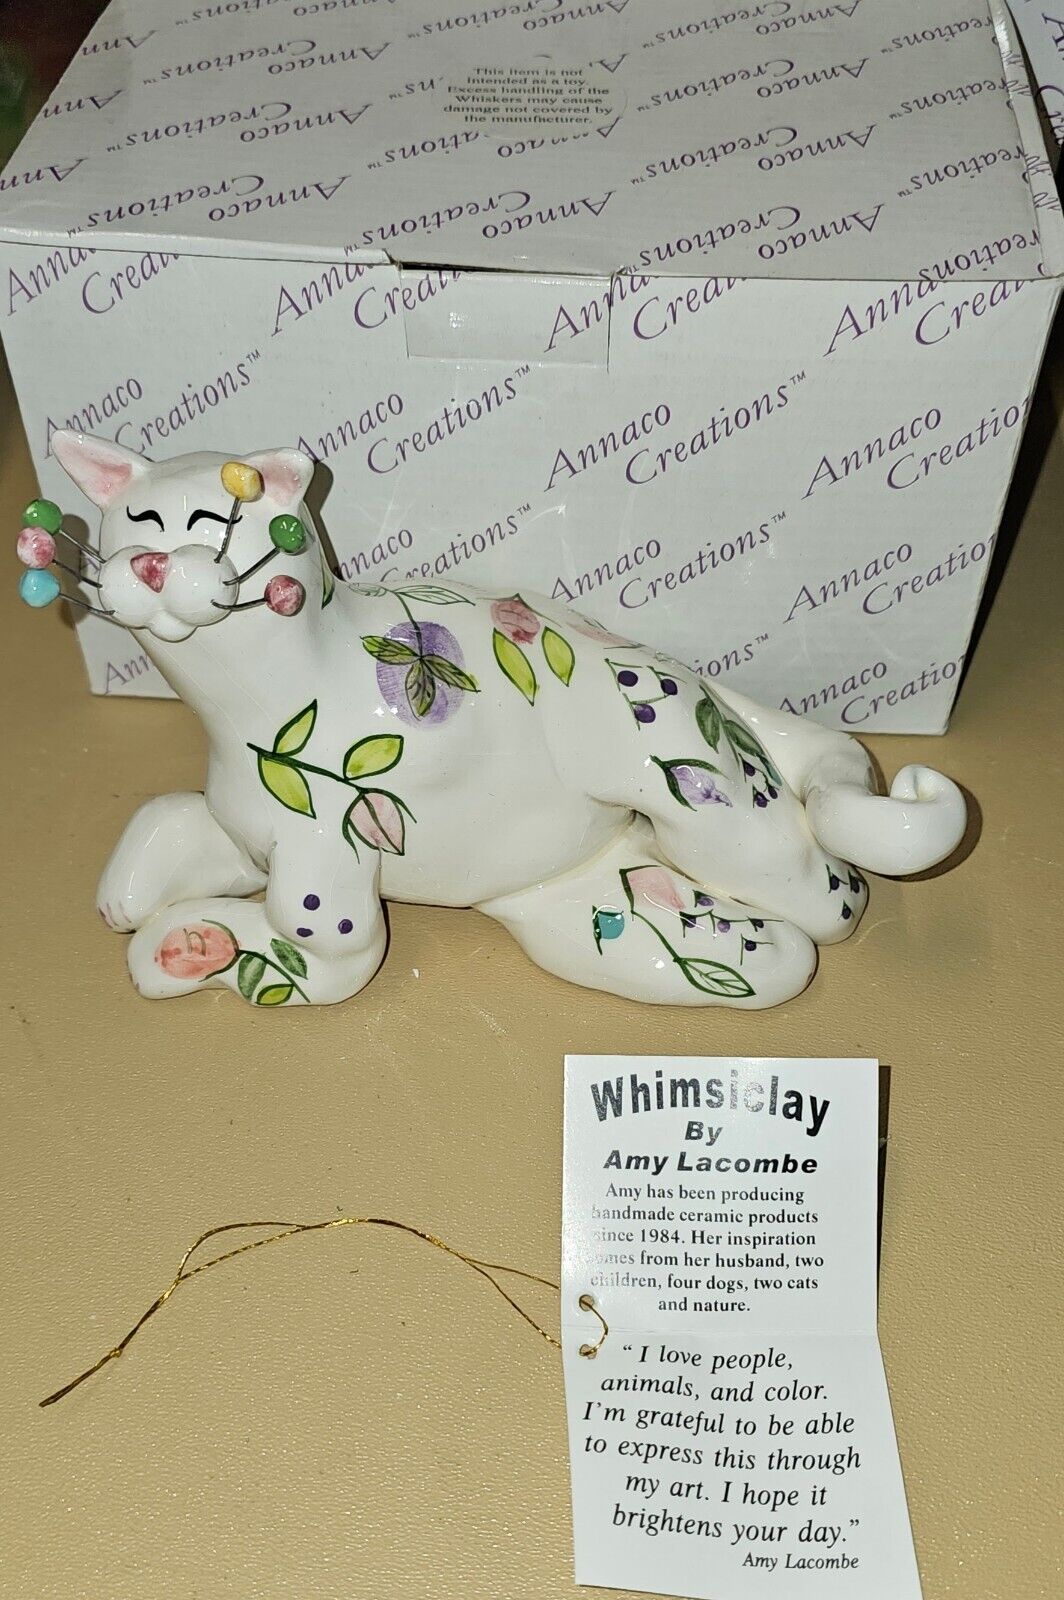 Annaco Creations Amy Lacombe WHIMSICLAY Cat Figurine w/Flower designs NEW IN BOX